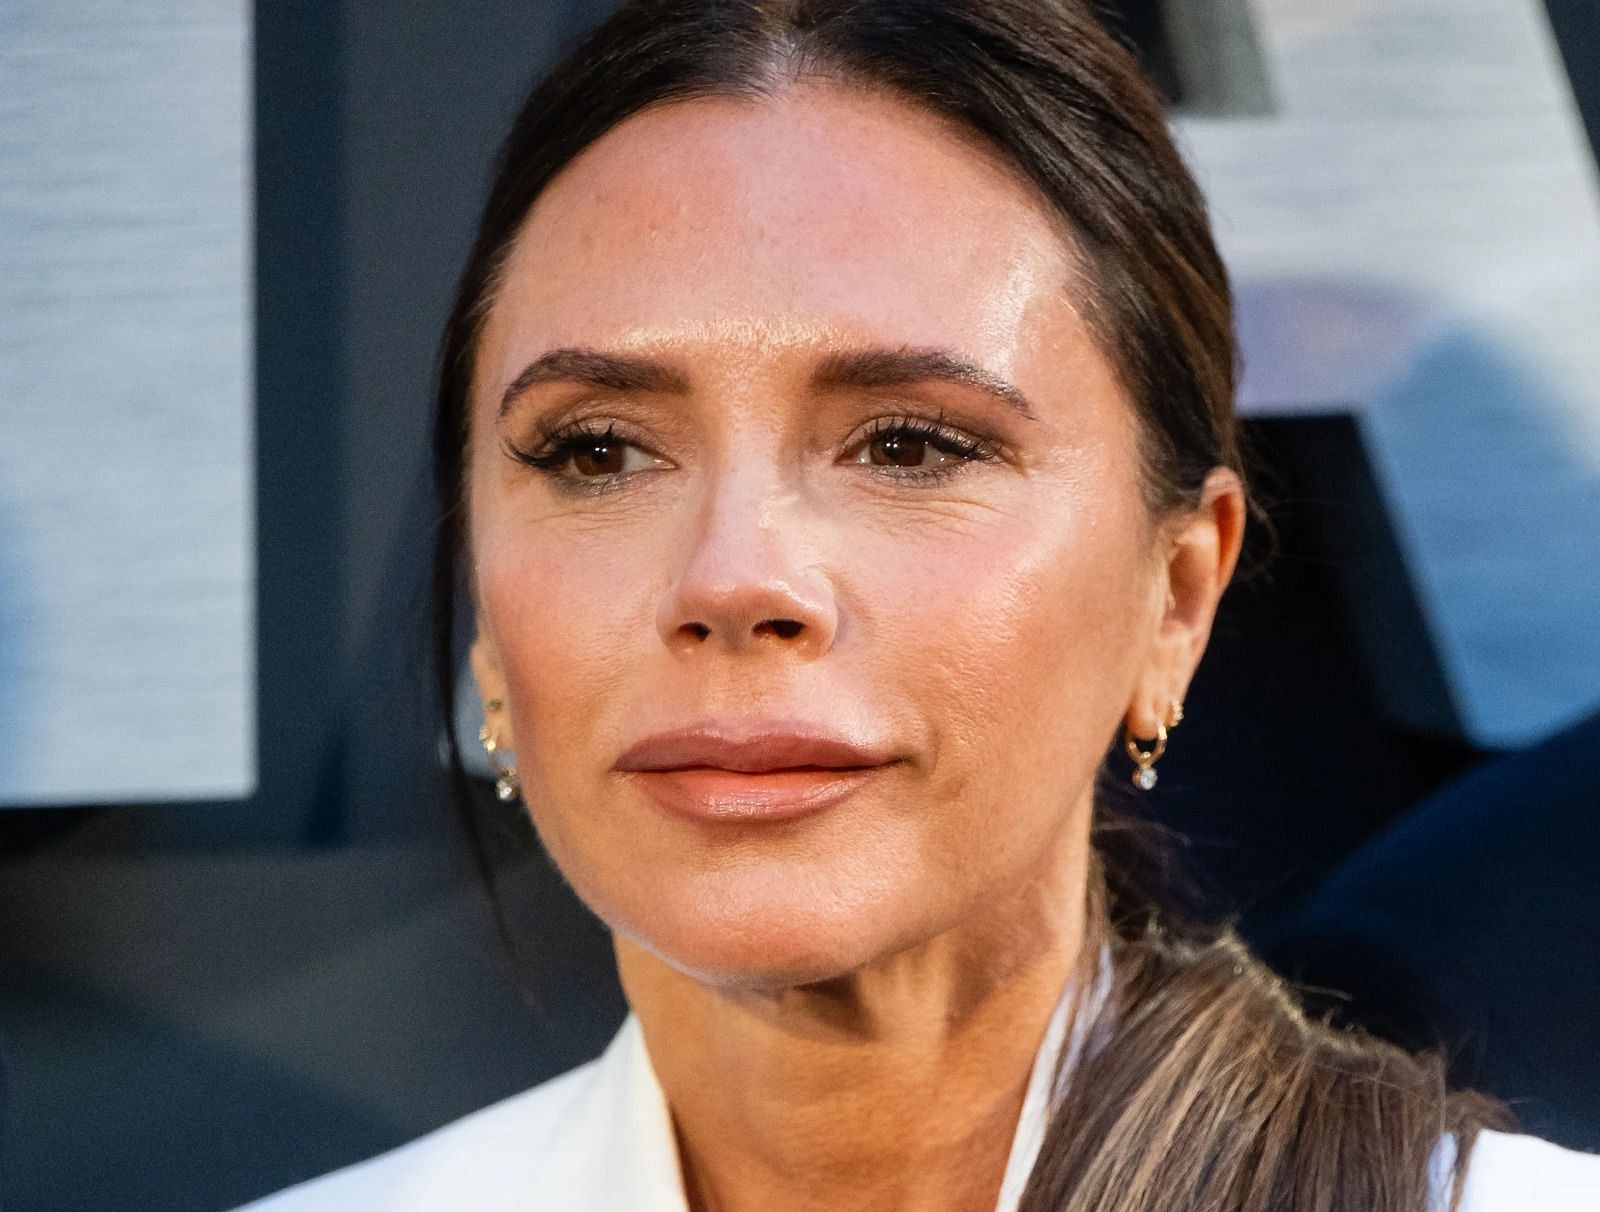 Victoria Beckham in celebrities with cold sores (Image via Getty Images)